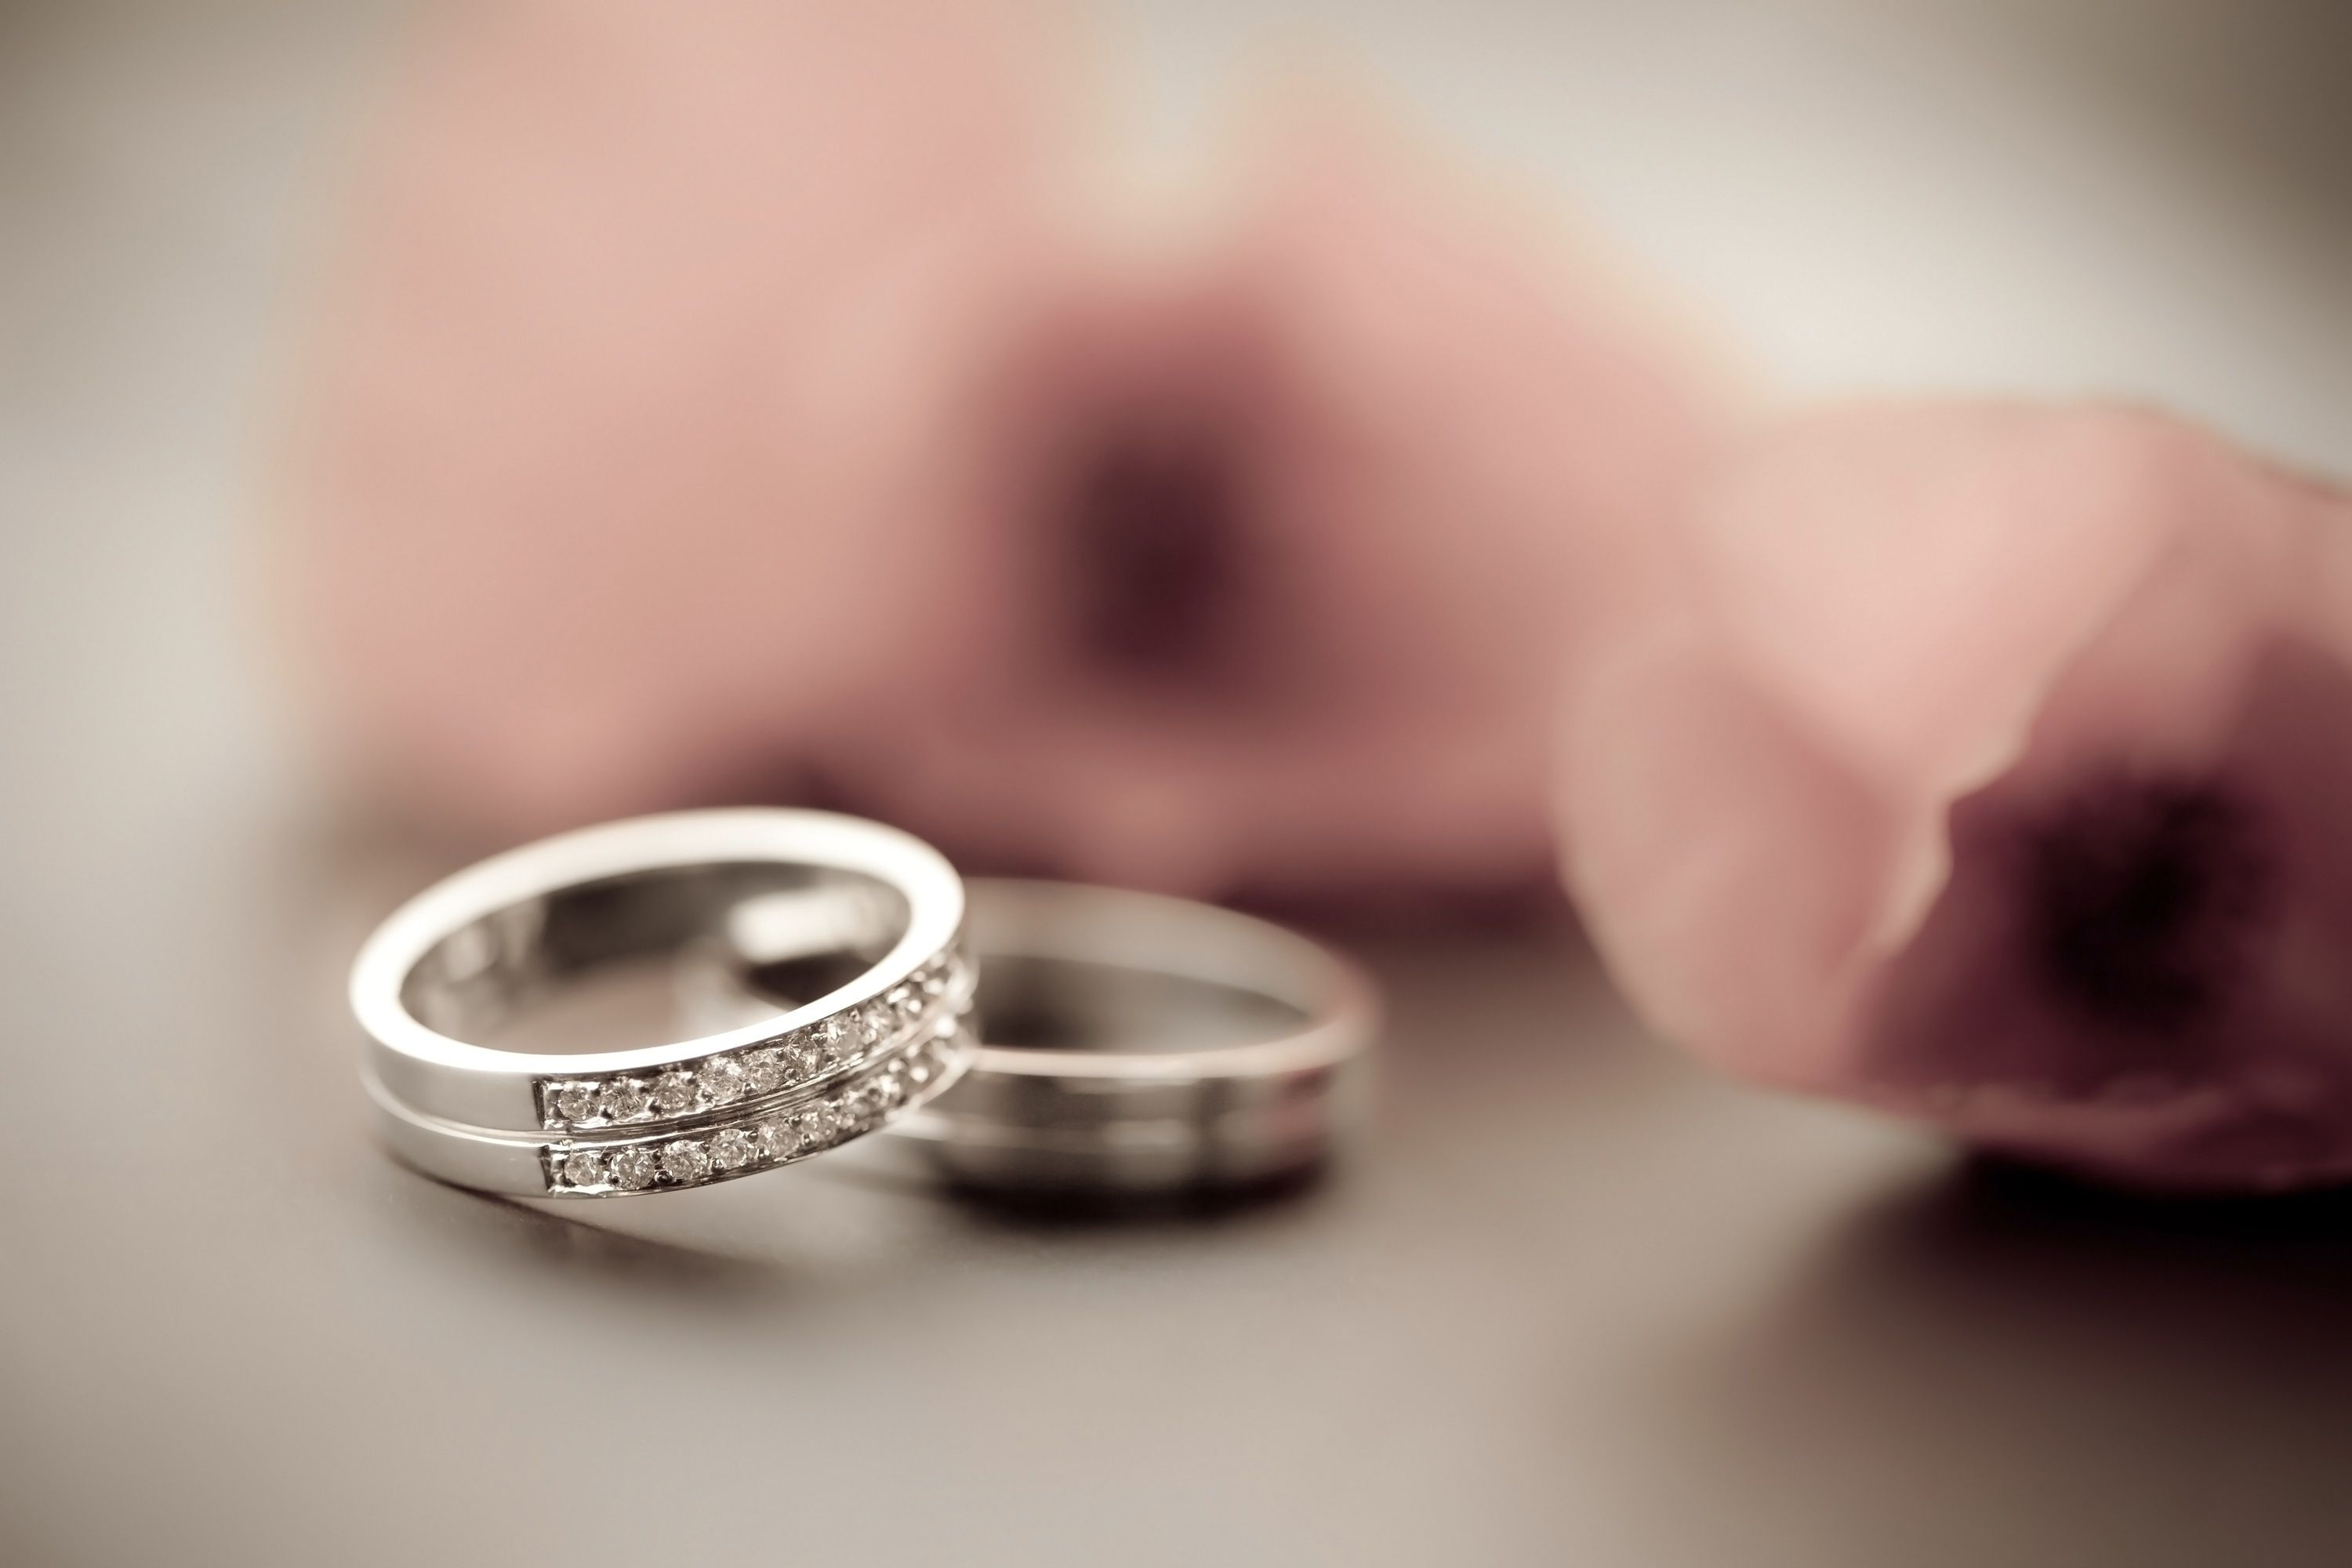 200+] Wedding Rings Pictures | Wallpapers.com